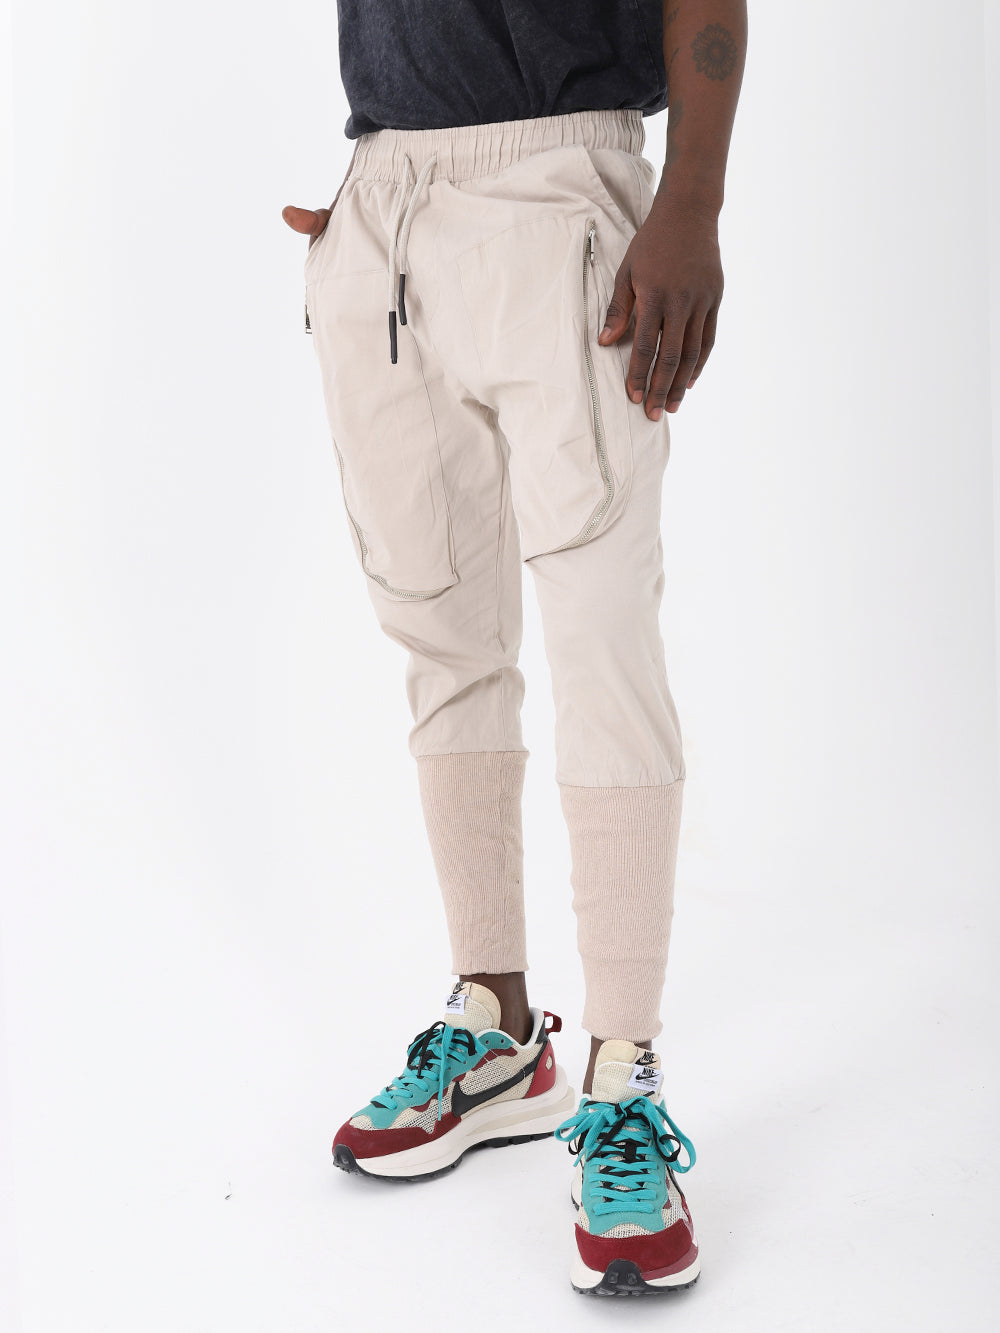 A fashionable man wearing ALTIS JOGGERS with an adjustable drawstring waist and sneakers.